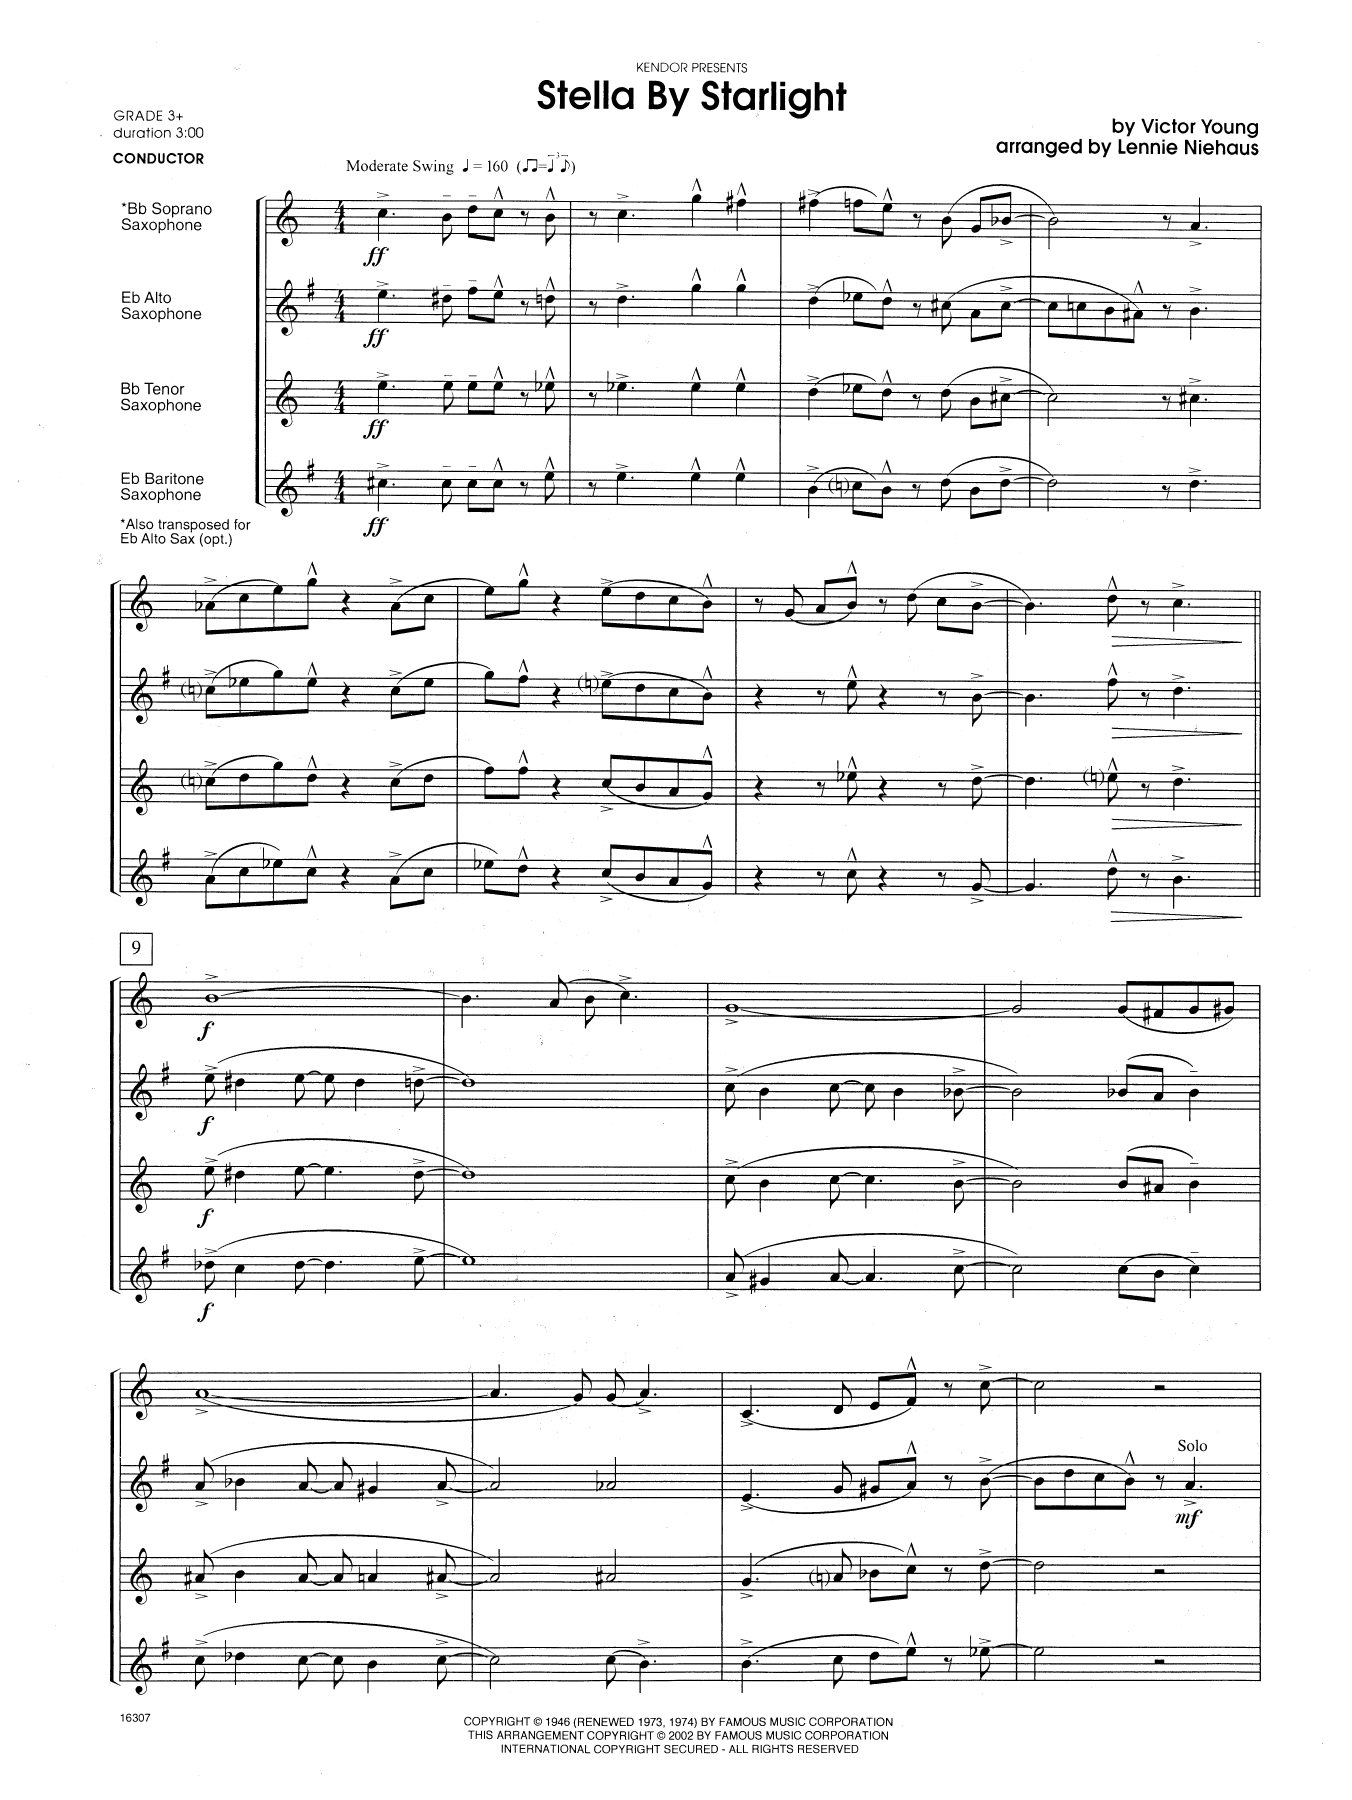 Lennie Niehaus Stella By Starlight (from the Paramount Picture The Uninvited) - Full Score sheet music notes and chords. Download Printable PDF.